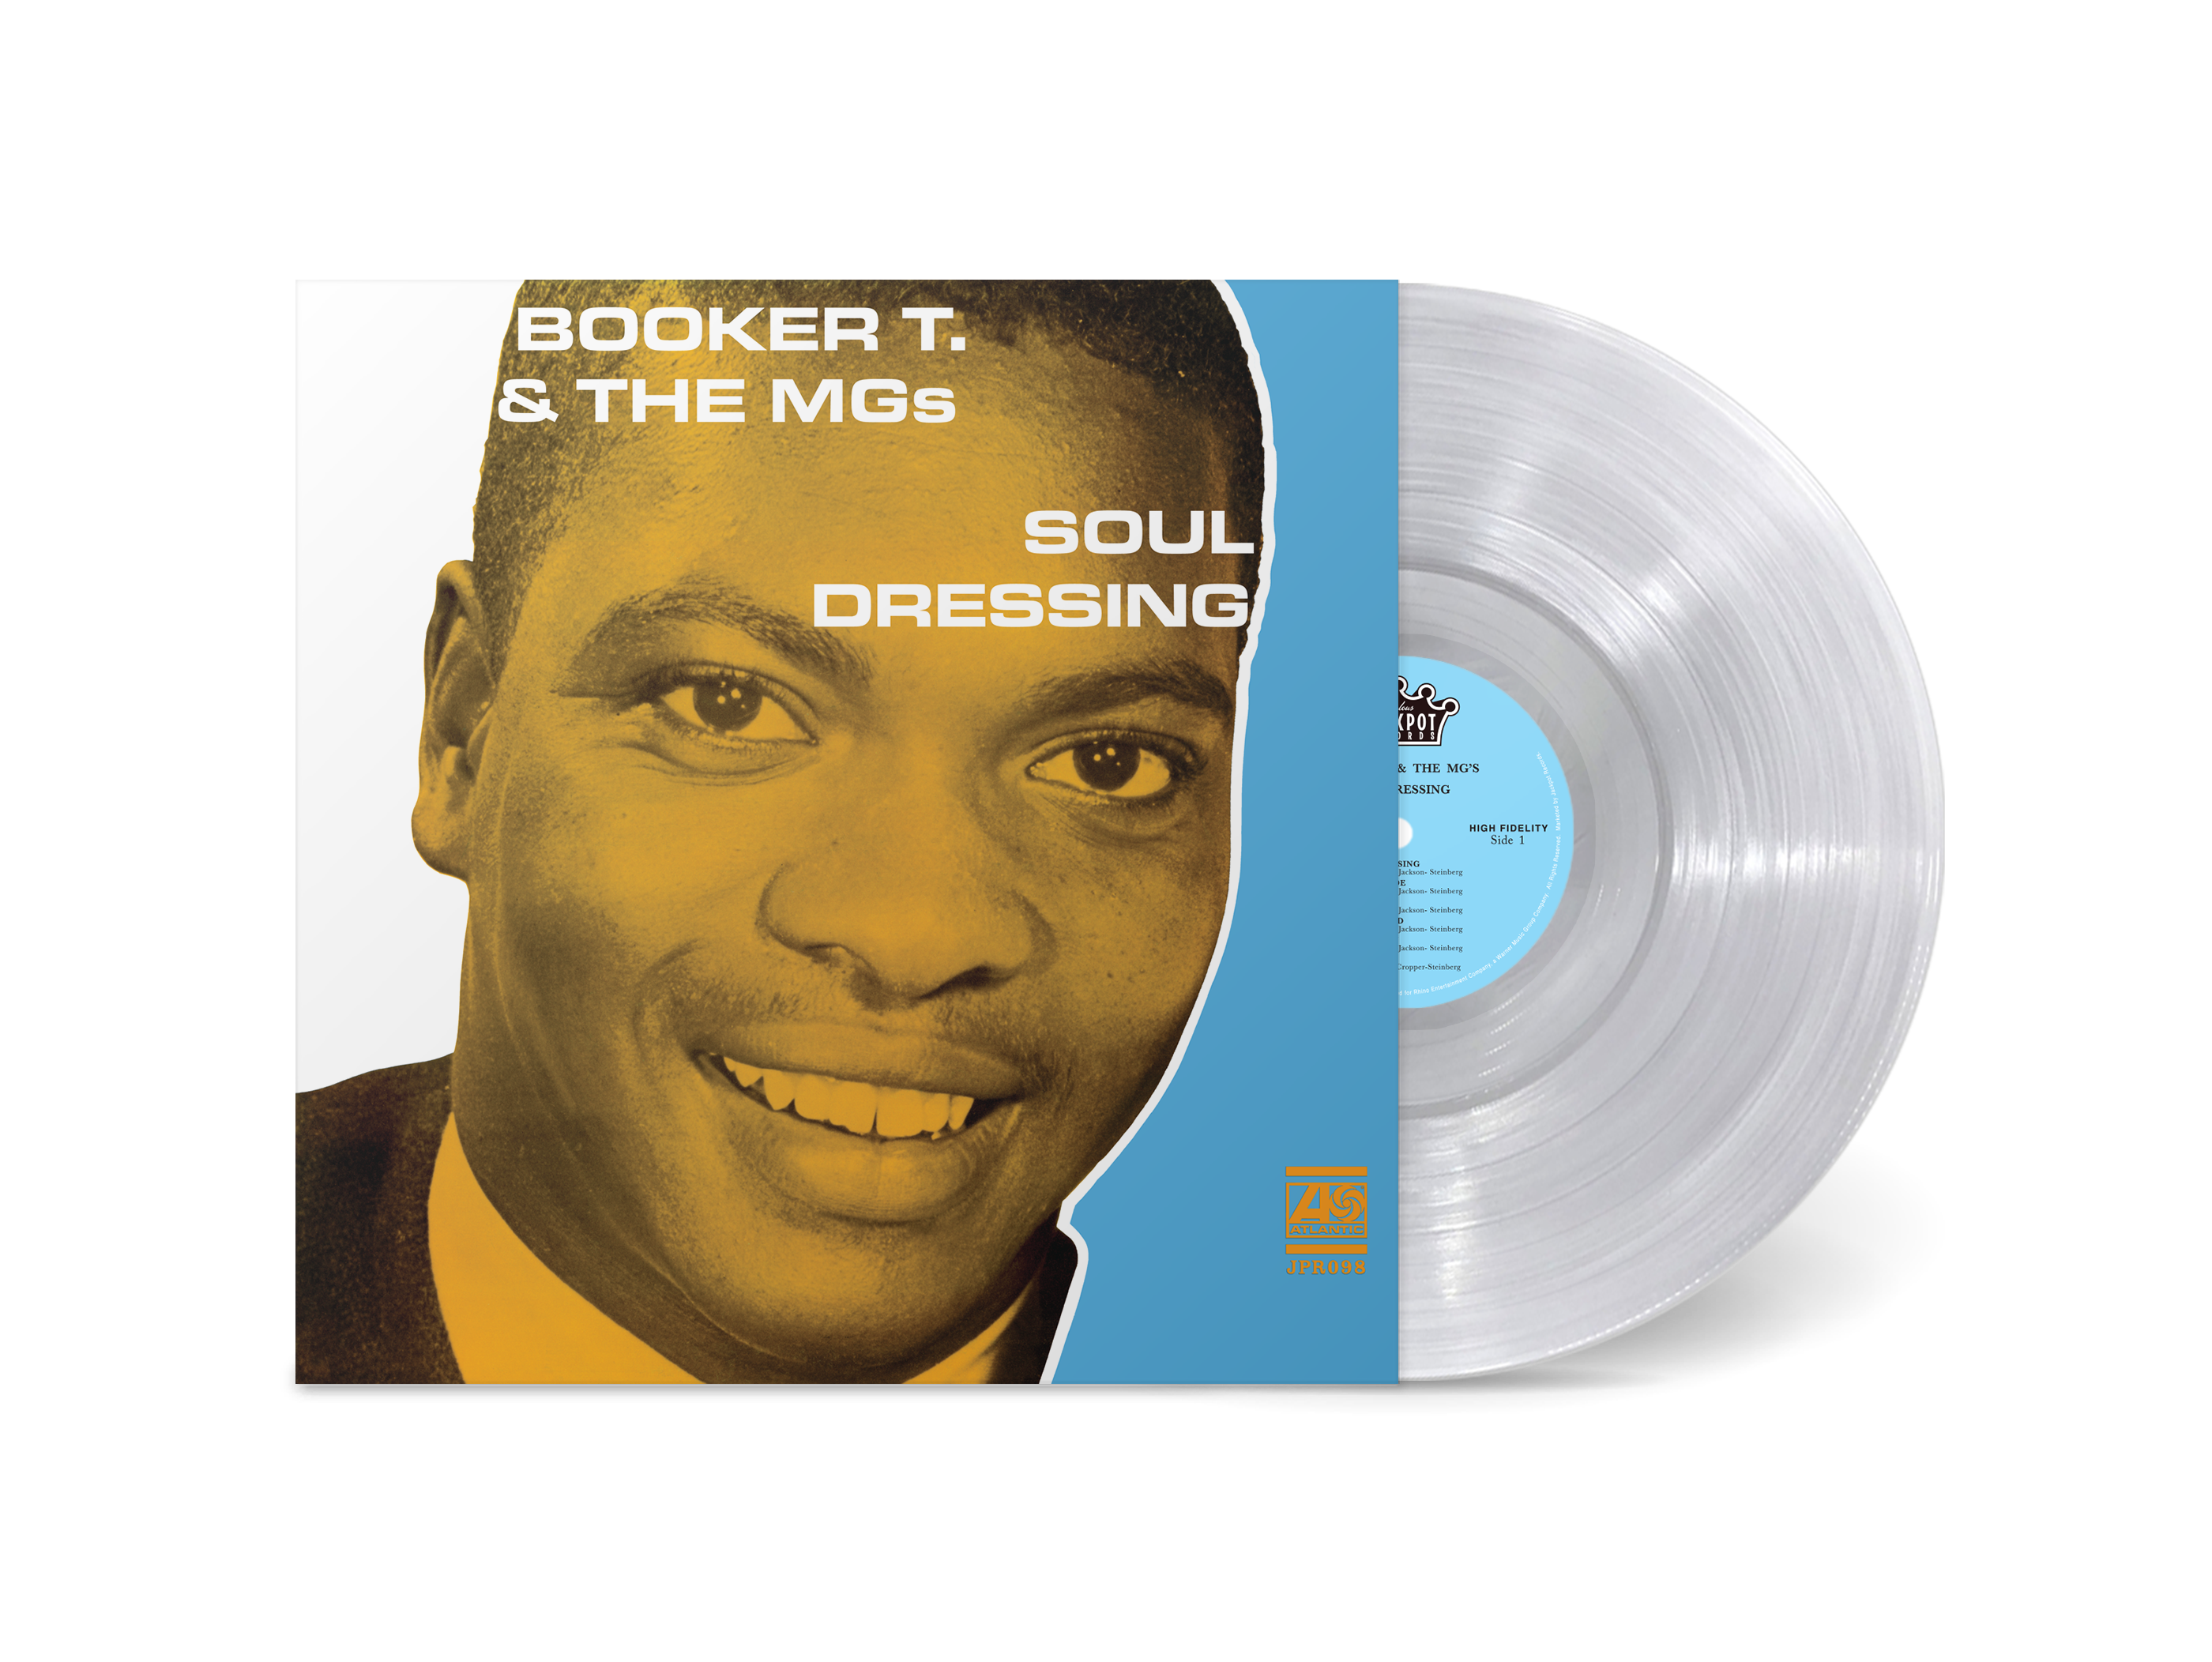 PRE-ORDER: Booker T & the MG's - Soul Dressing (Mono) (Jackpot Exclusive Sky Blue Swirl Vinyl - Limited to 500)